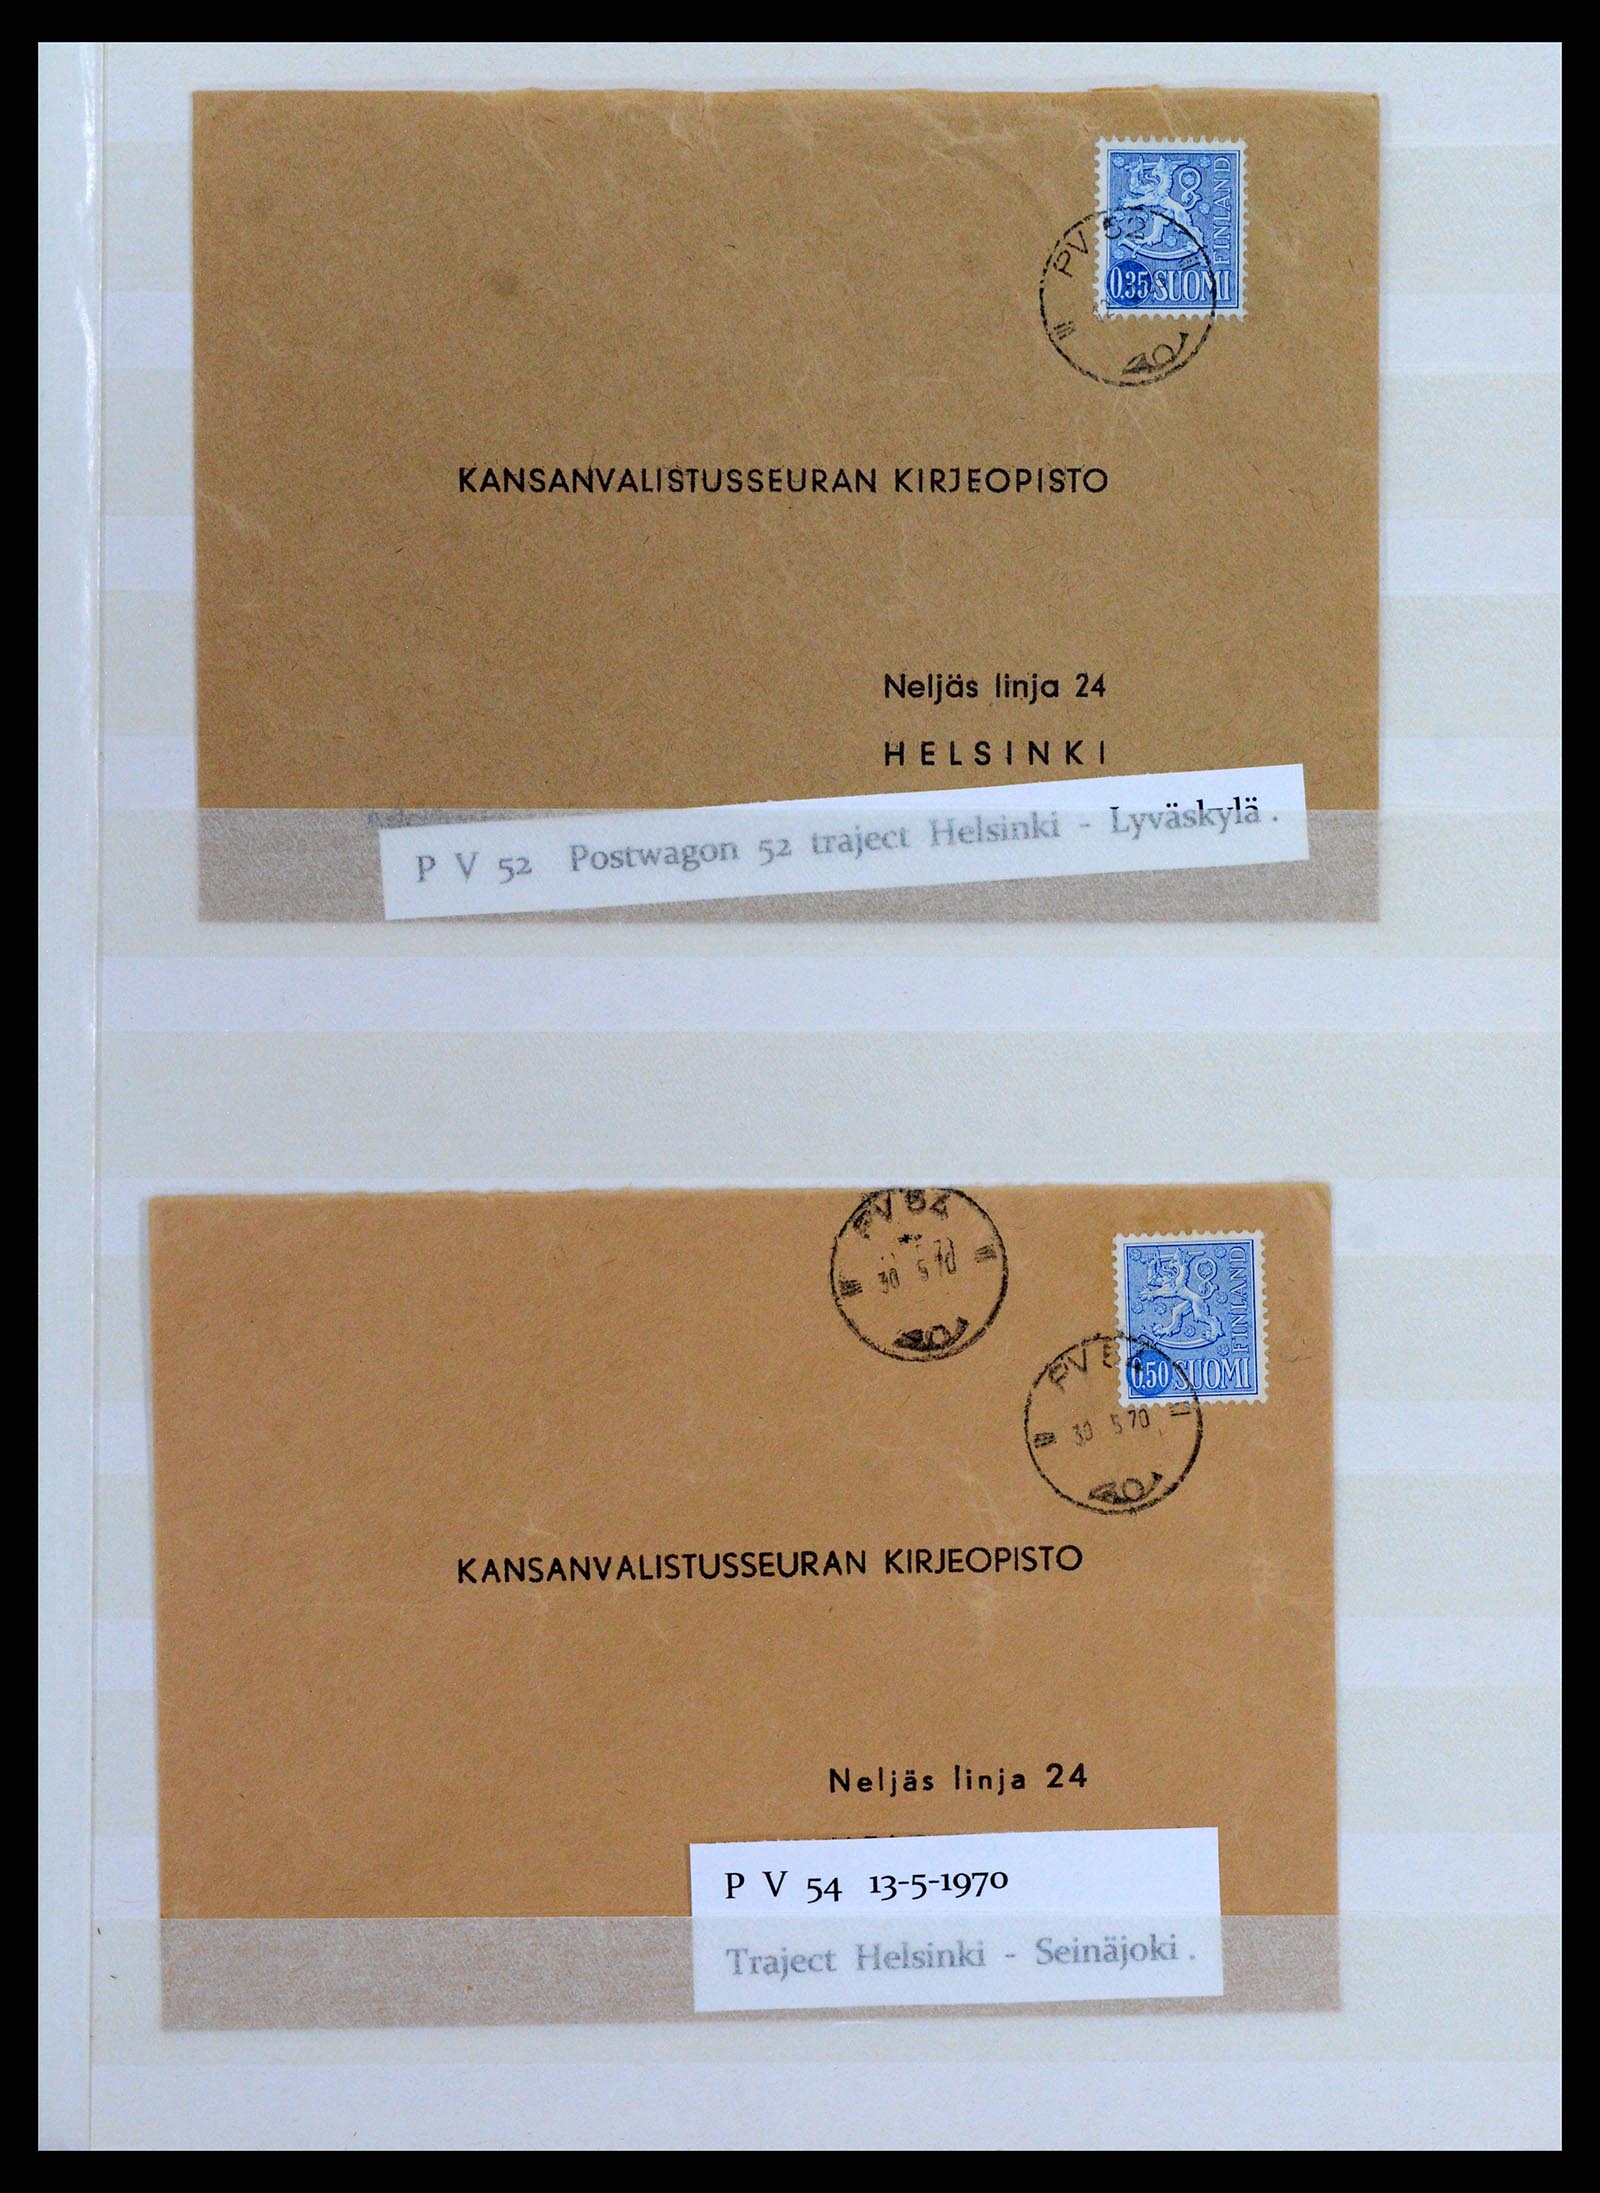 37766 148 - Stamp collection 37766 Finland railway cancellations 1870-1950.